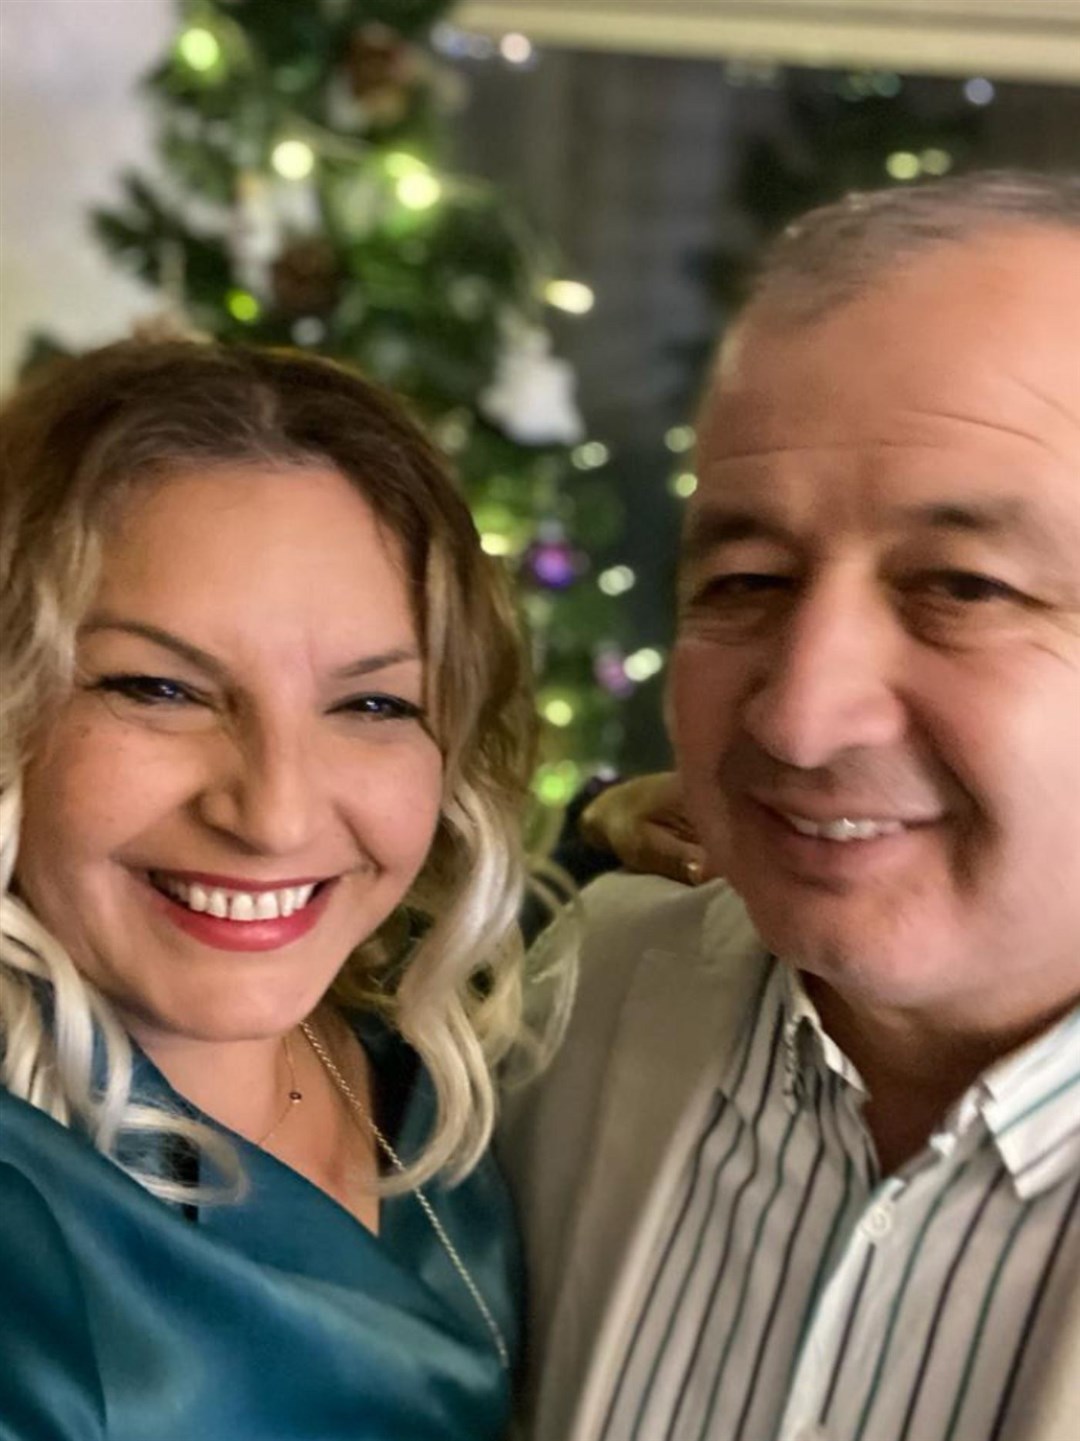 Oznur Goktas owns a restaurant and hotel with her husband in Fethiye and has been co-ordinating a donation effort for members of her staff past and present (Oznur Goktas)